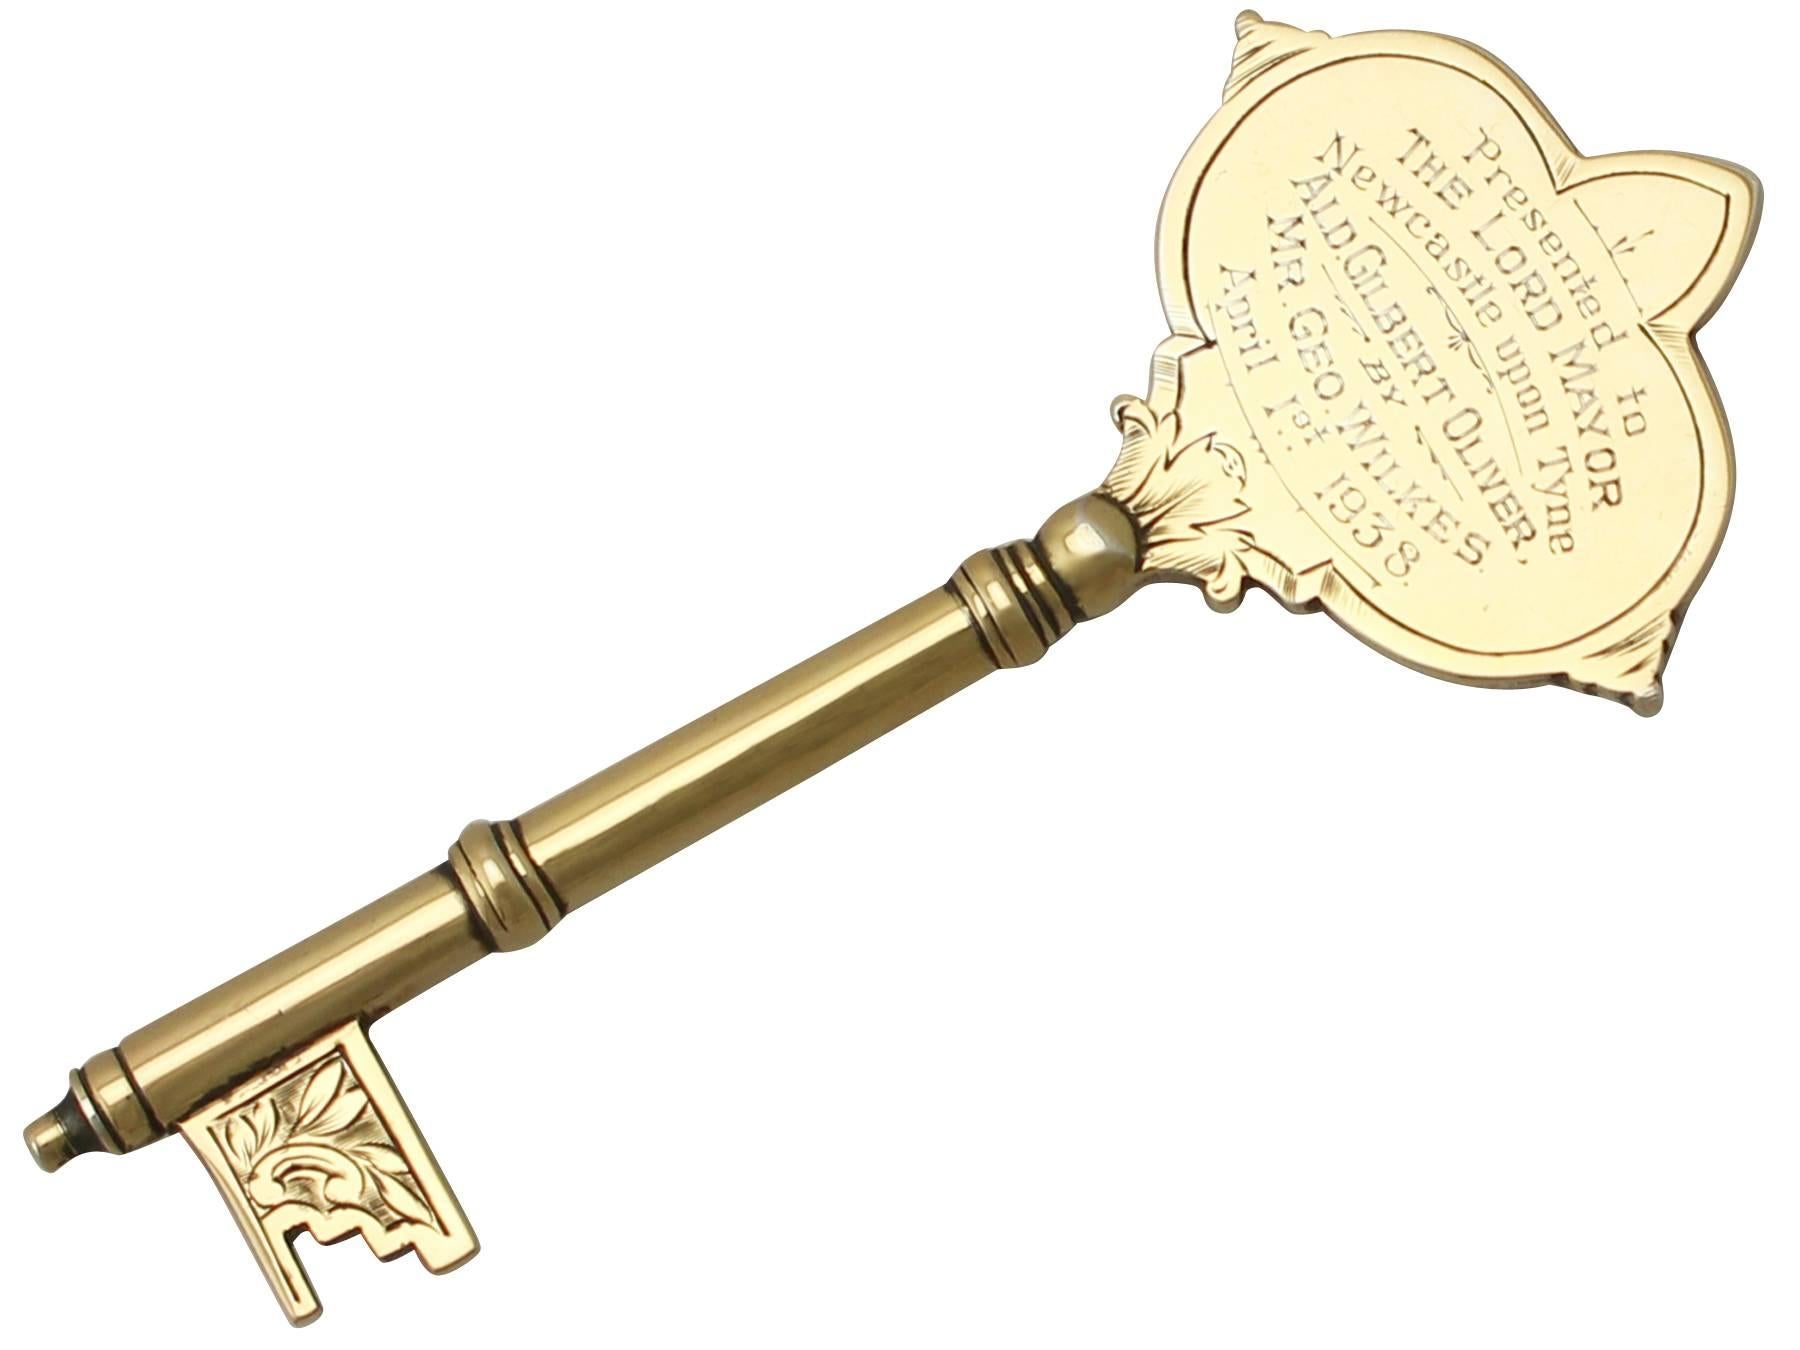 An exceptional, fine and impressive antique George V English sterling silver ceremonial/presentation key, an addition to our ornamental presentation collection.

This exceptional antique George V sterling silver presentation key has a rounded